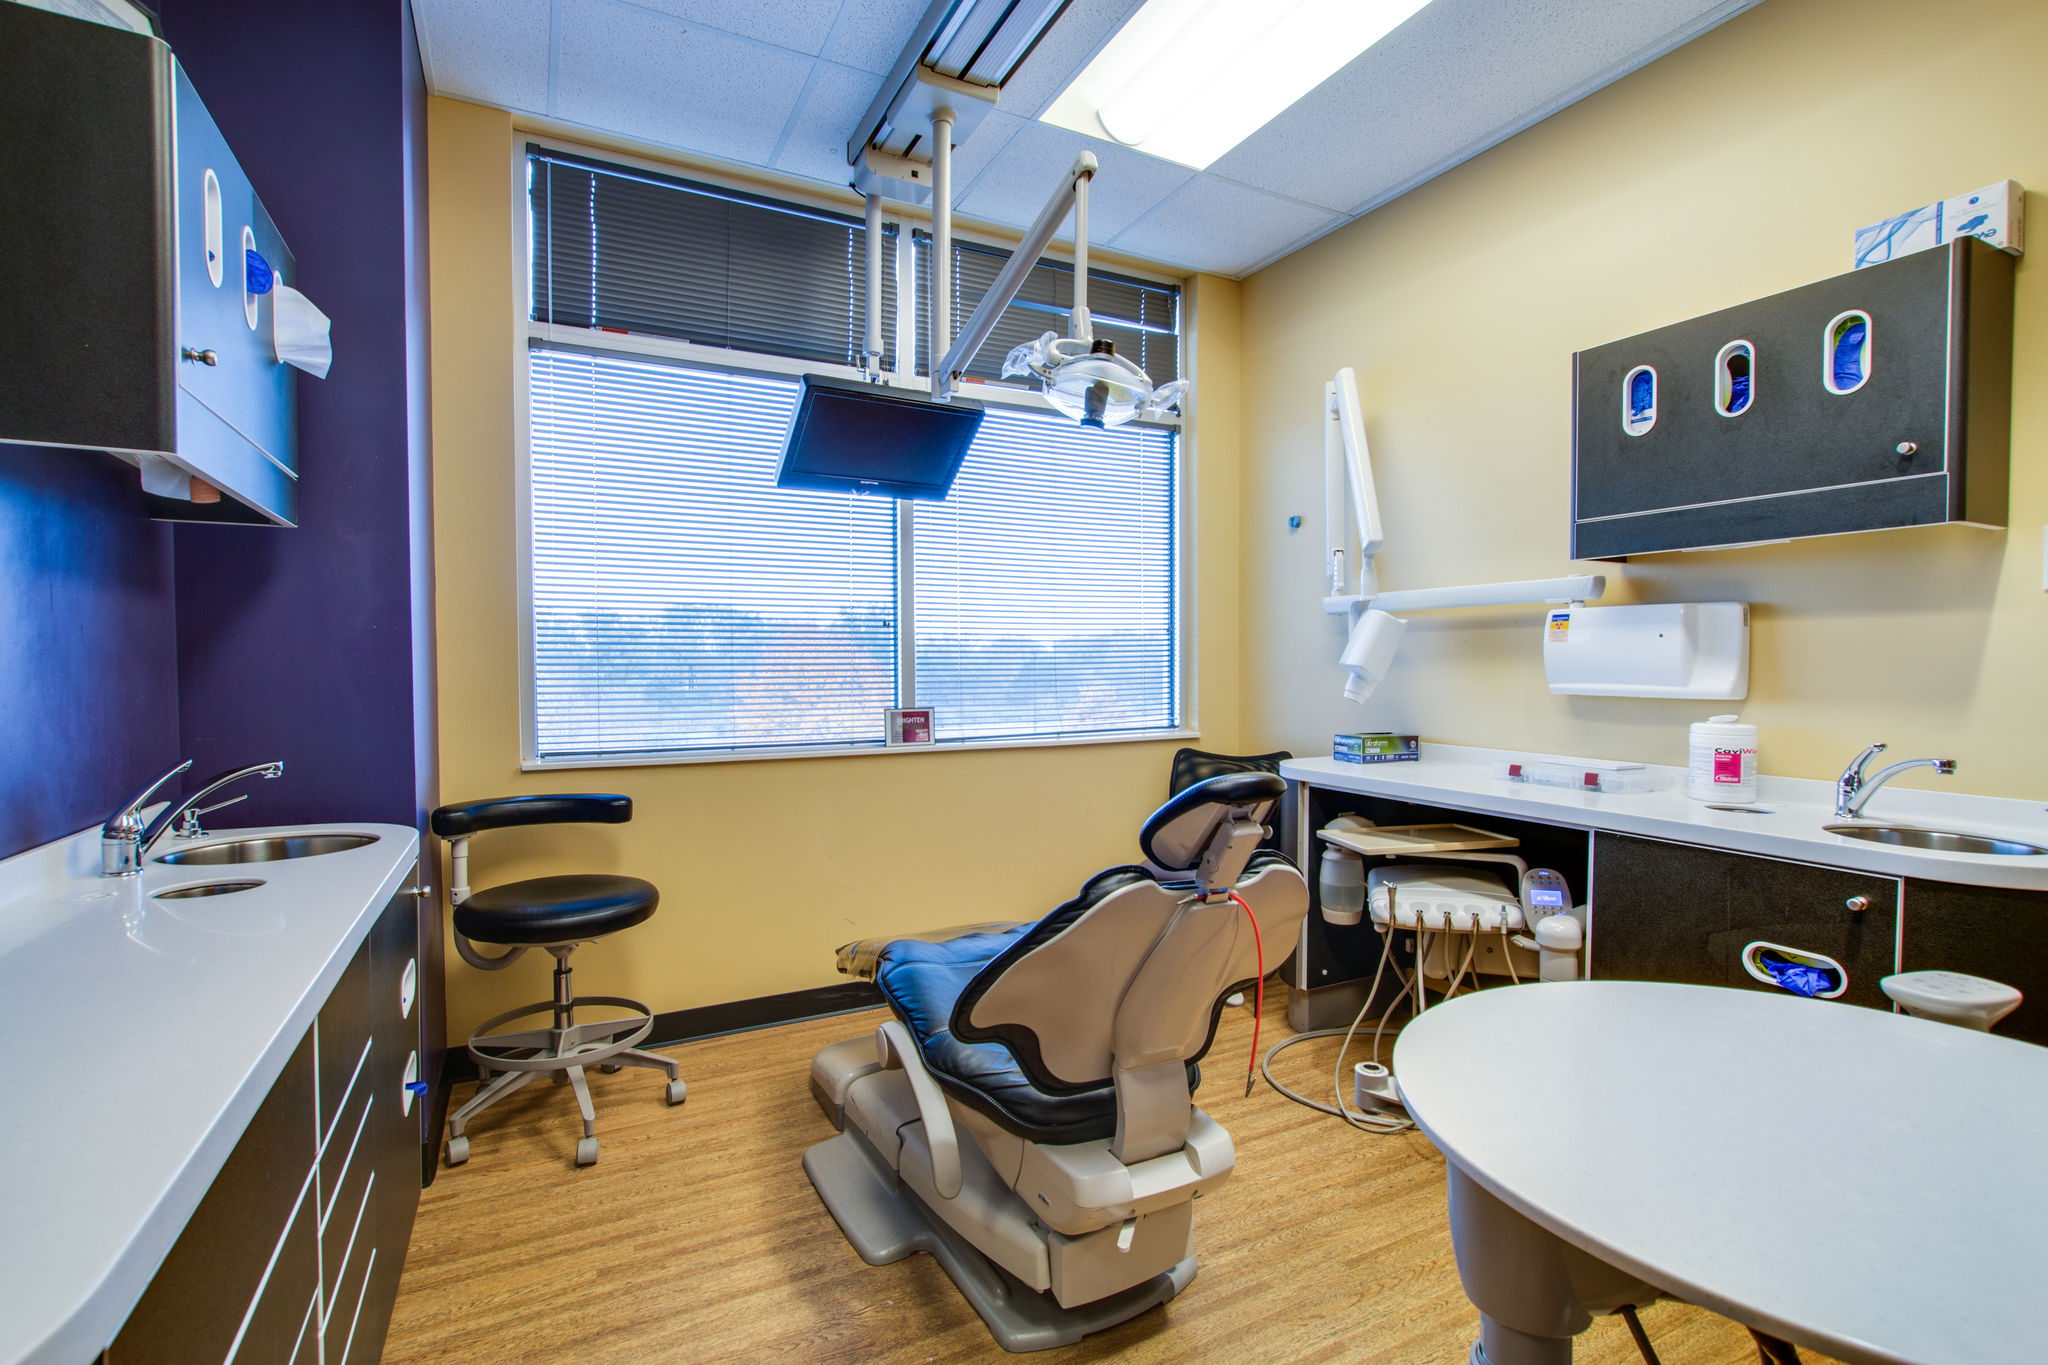 Dental chair and patient room at Snodgrass-King in Murfreesboro, TN